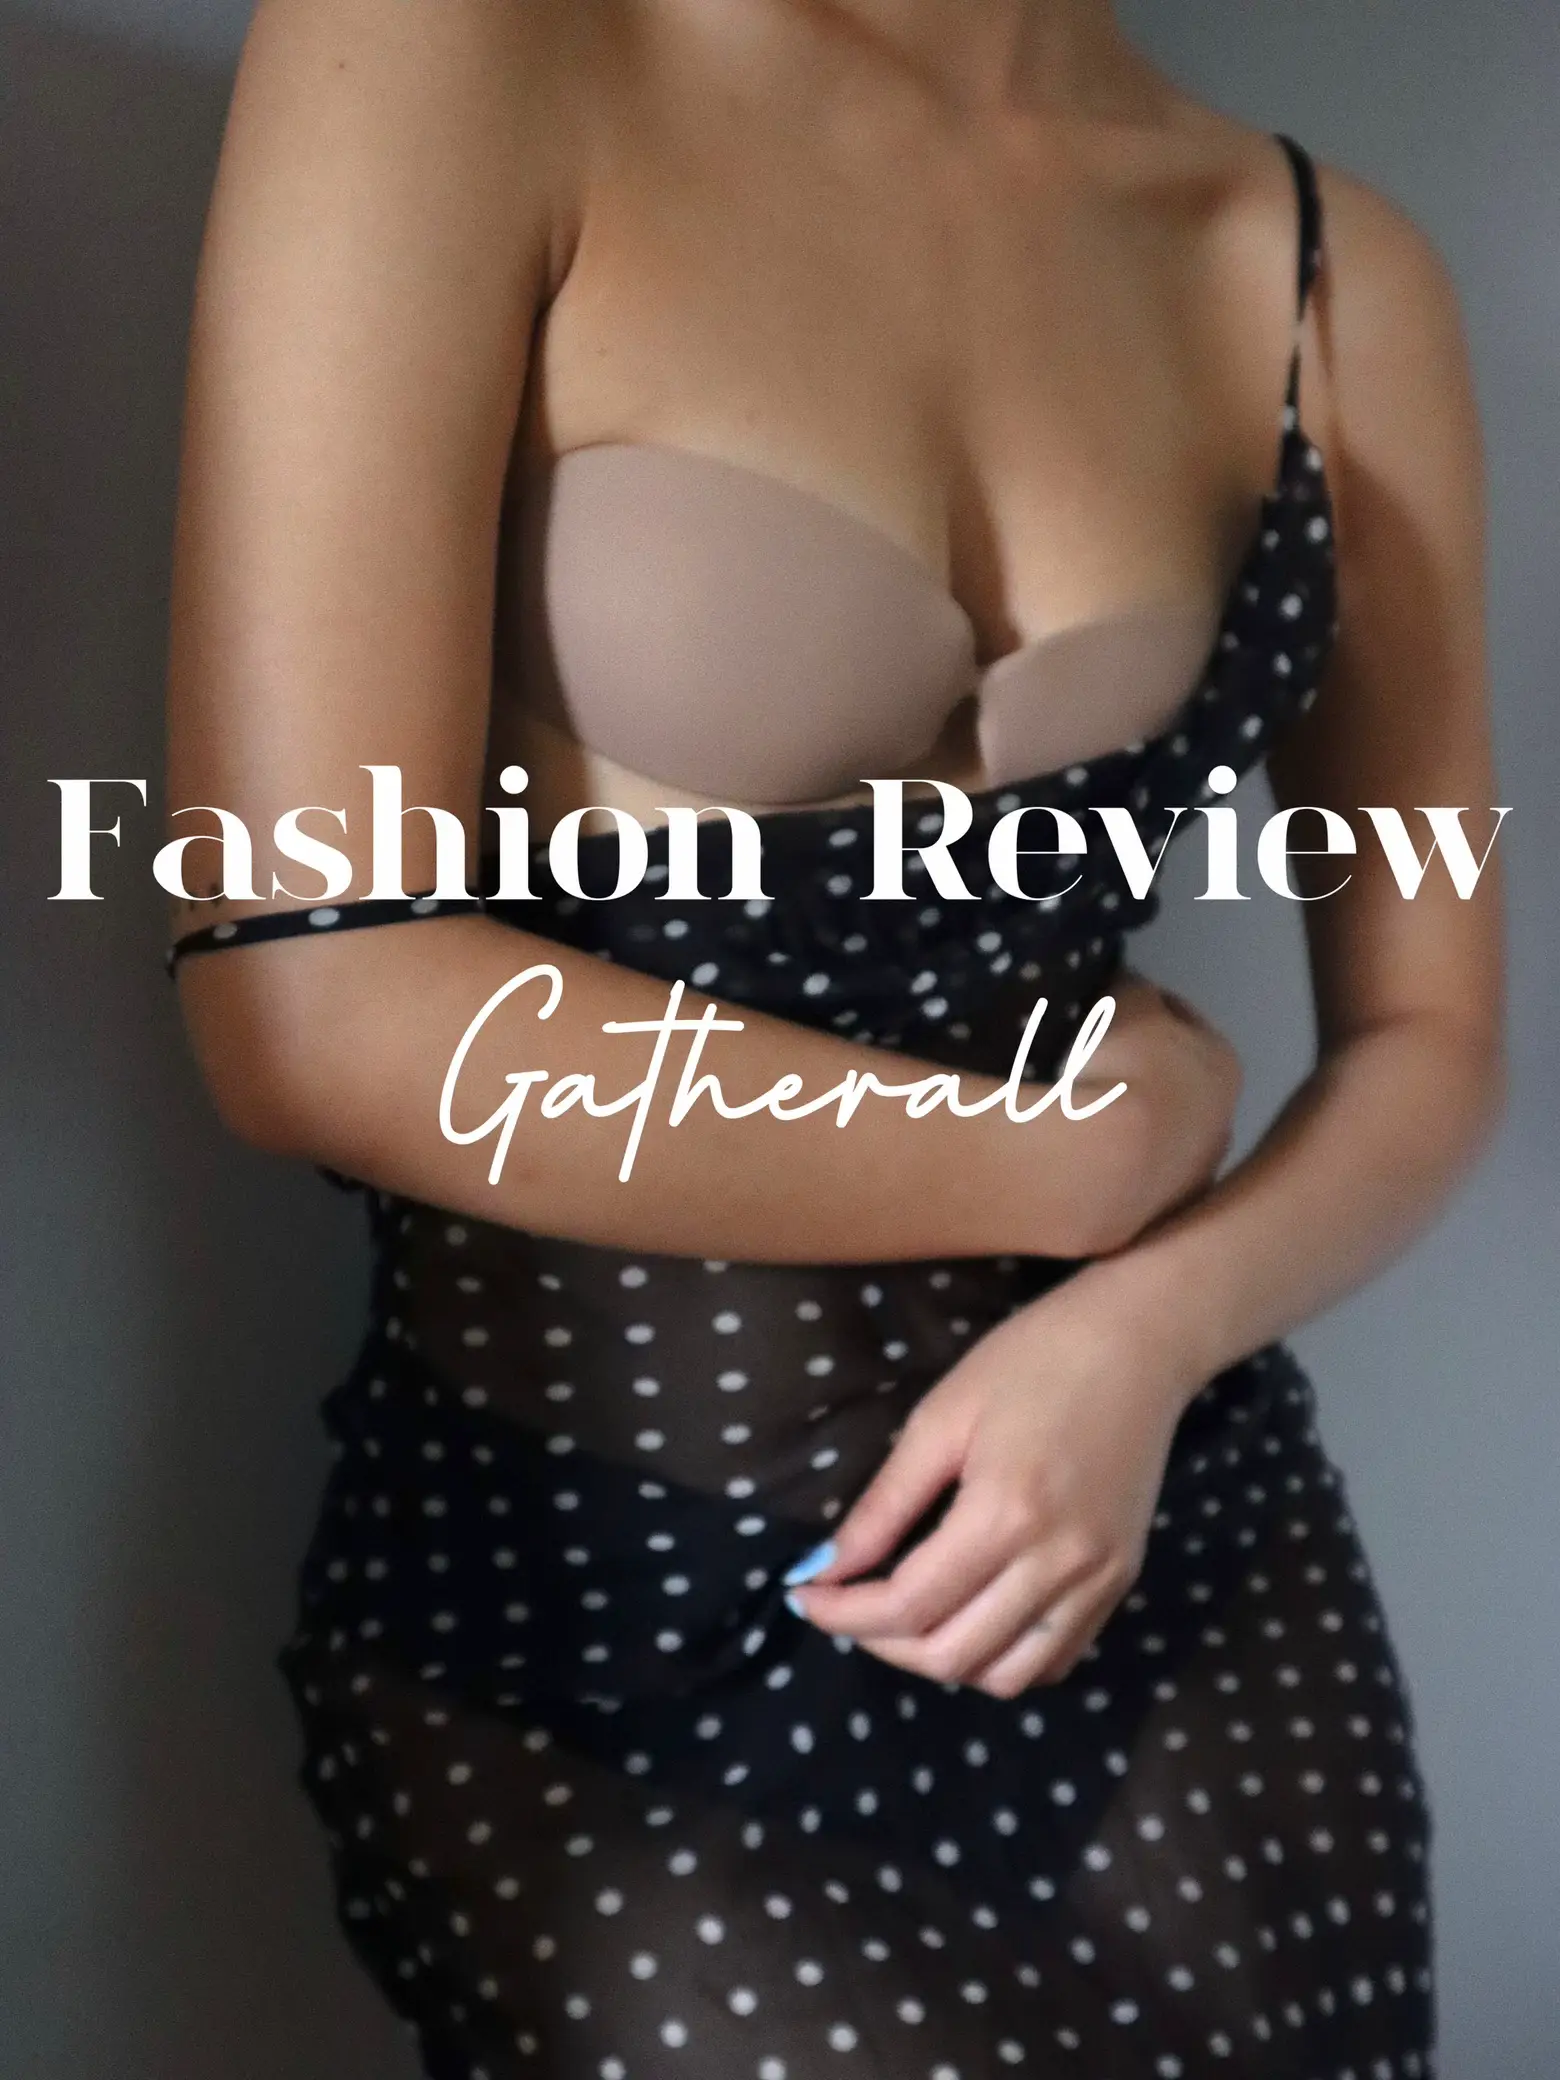 Fashion Review: Gatherall, Gallery posted by Huyen Nguyen